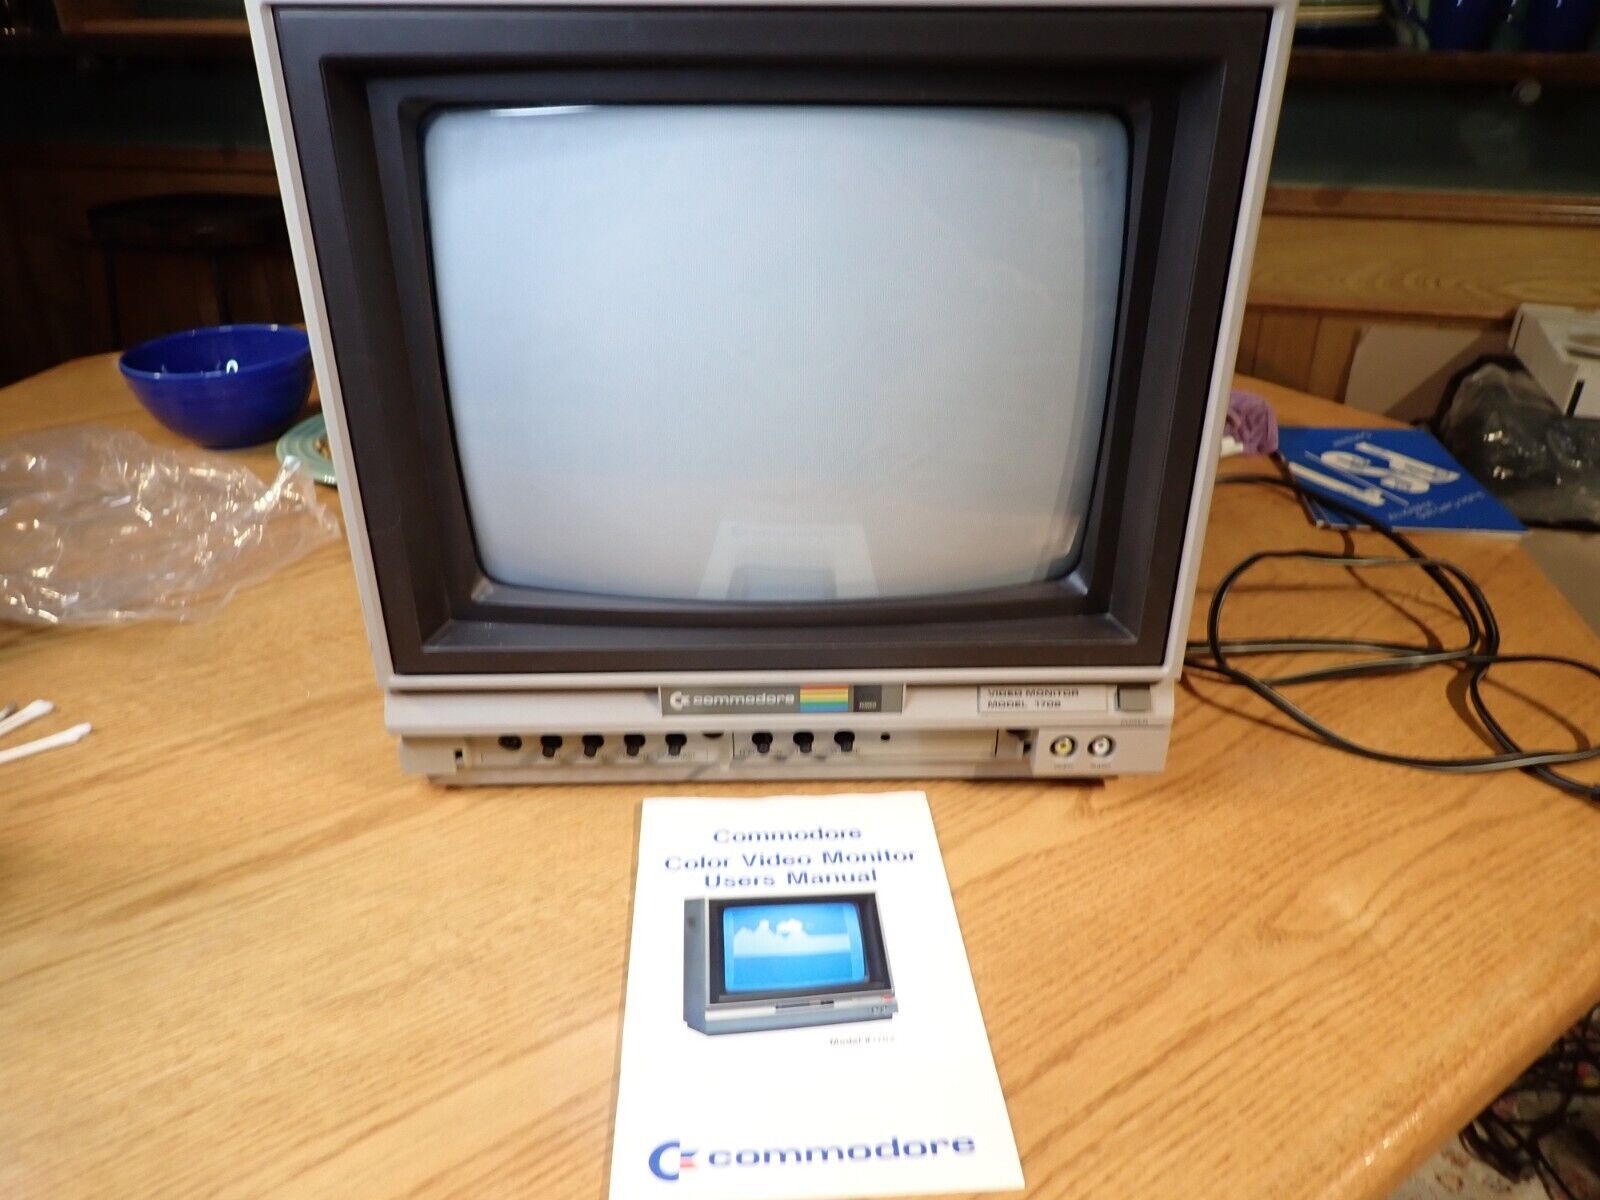 VINTAGE COMMODORE CRT COLOR VIDEO MONITOR 1702, BUILT-IN SPEAKERS RETRO GAMING